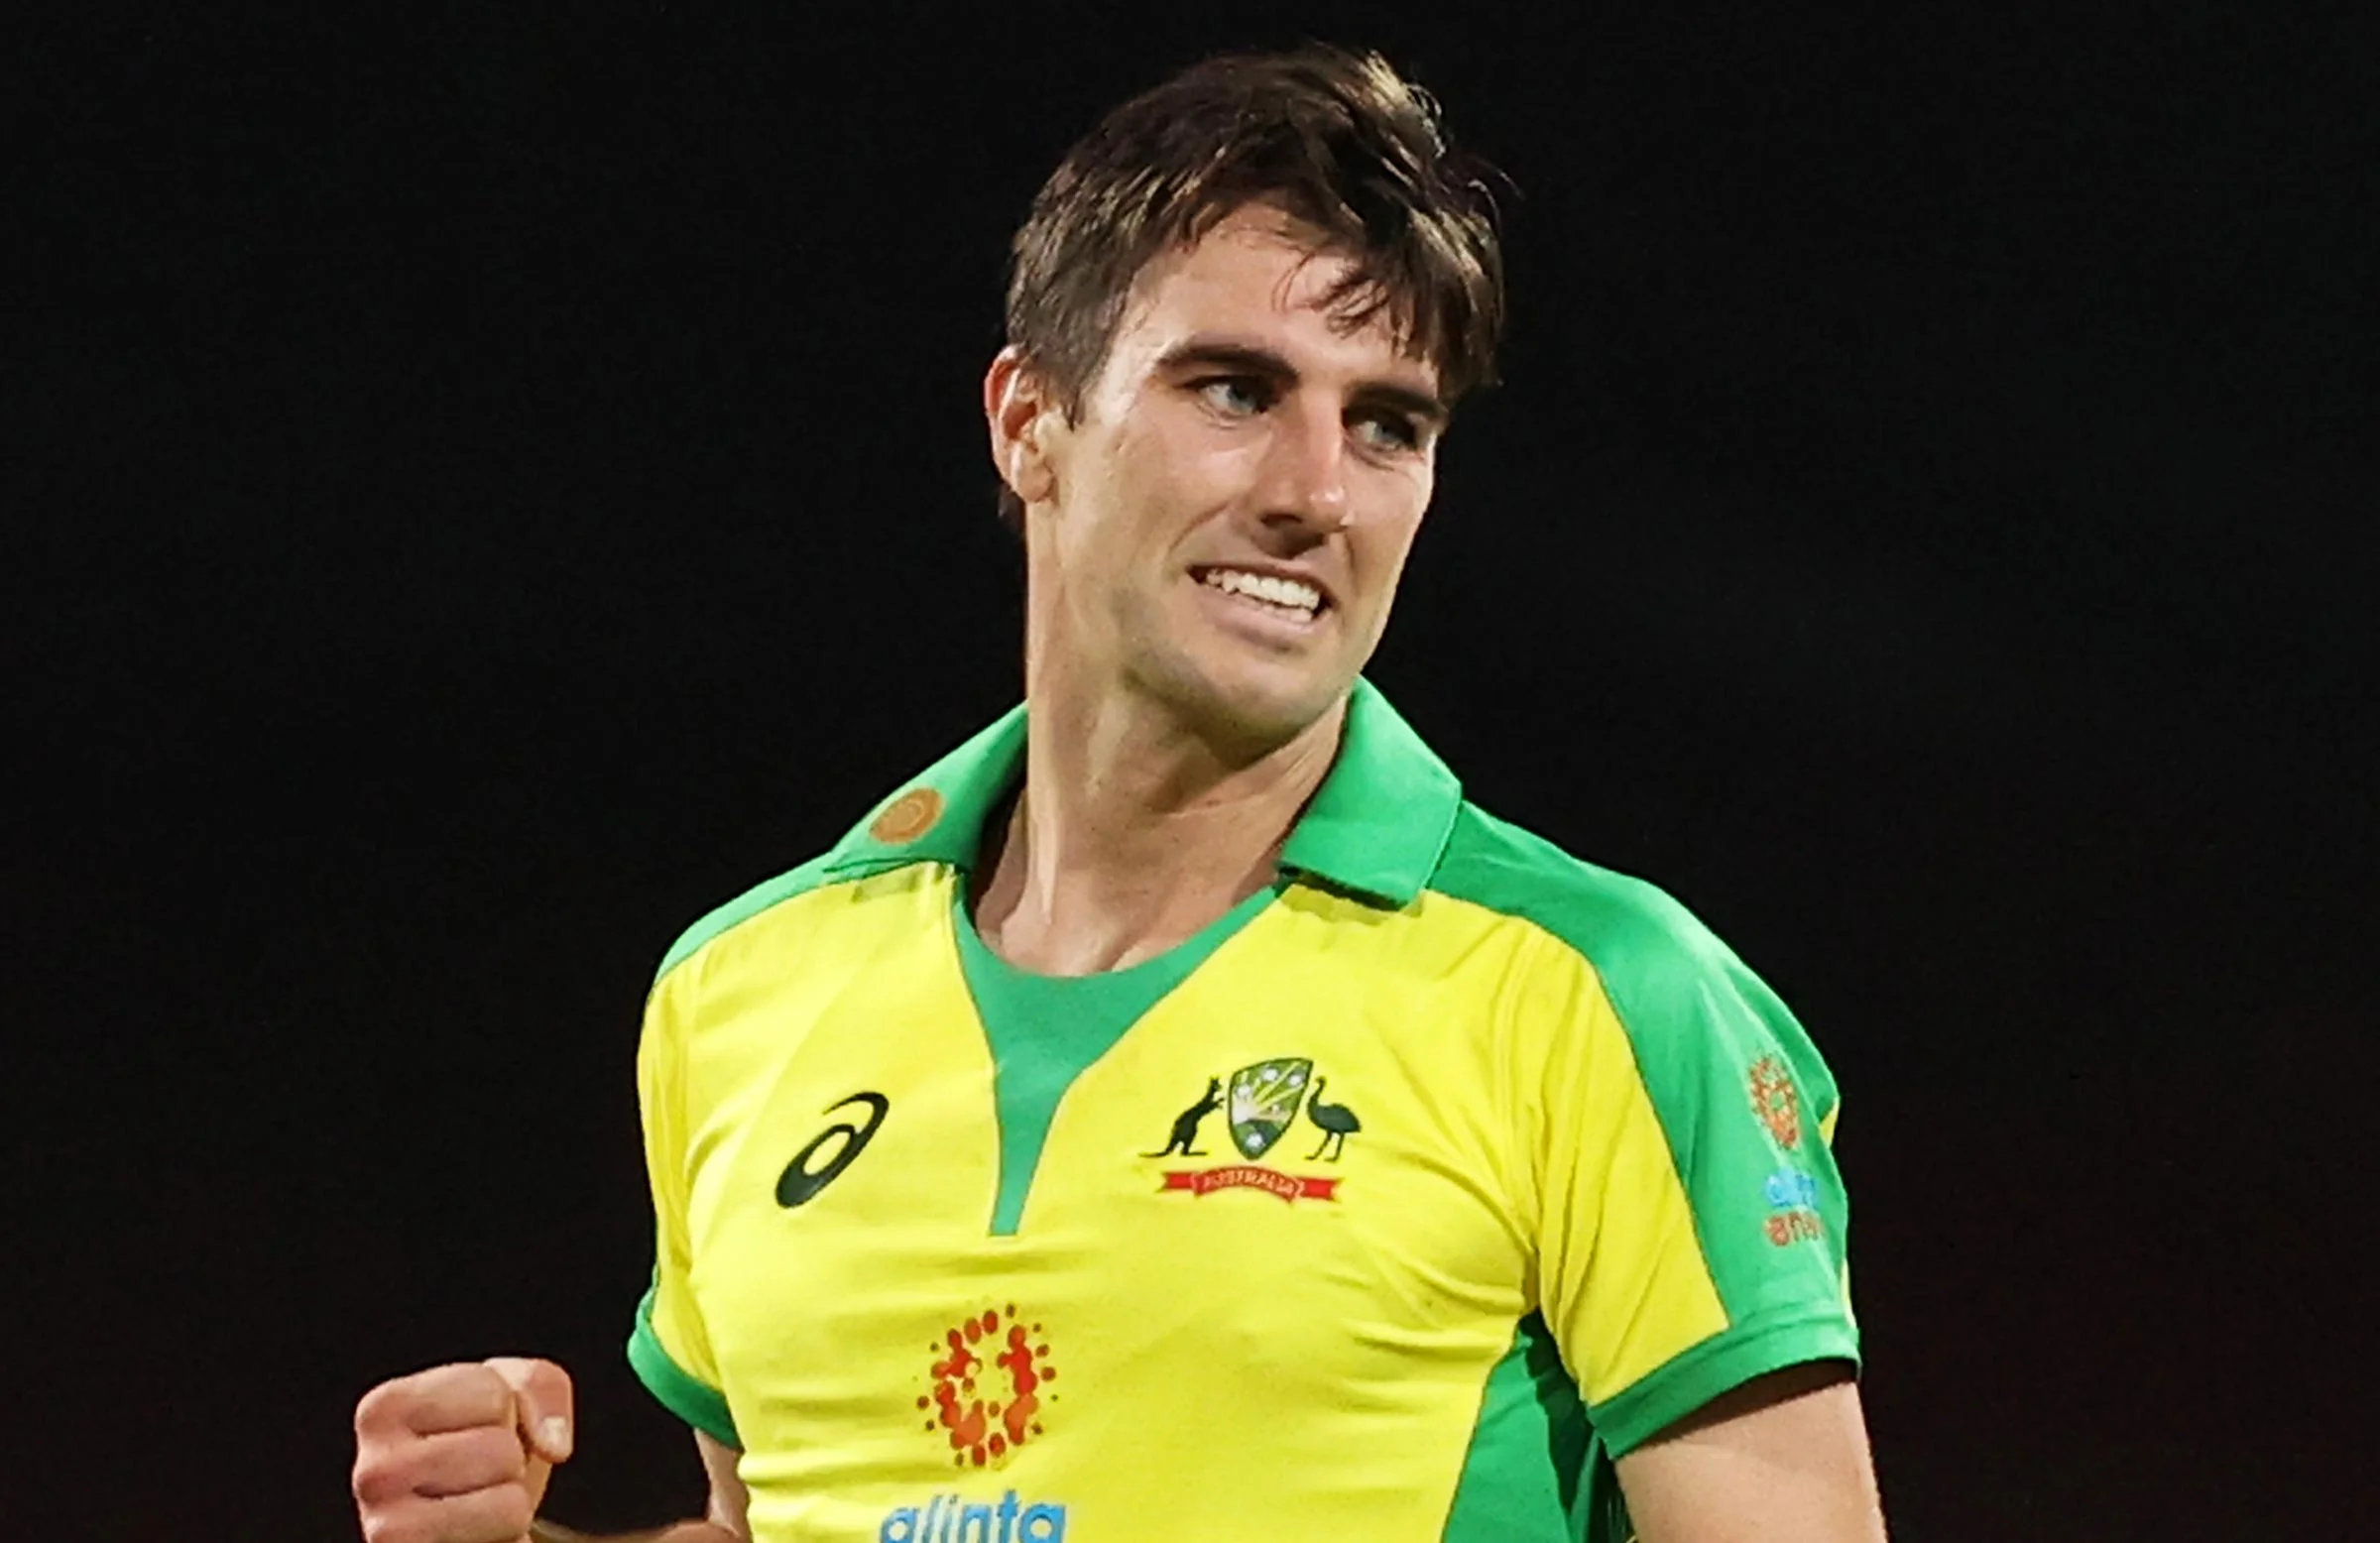 REVEALED: Will Pat Cummins Play In The ICC Cricket World Cup 2023?